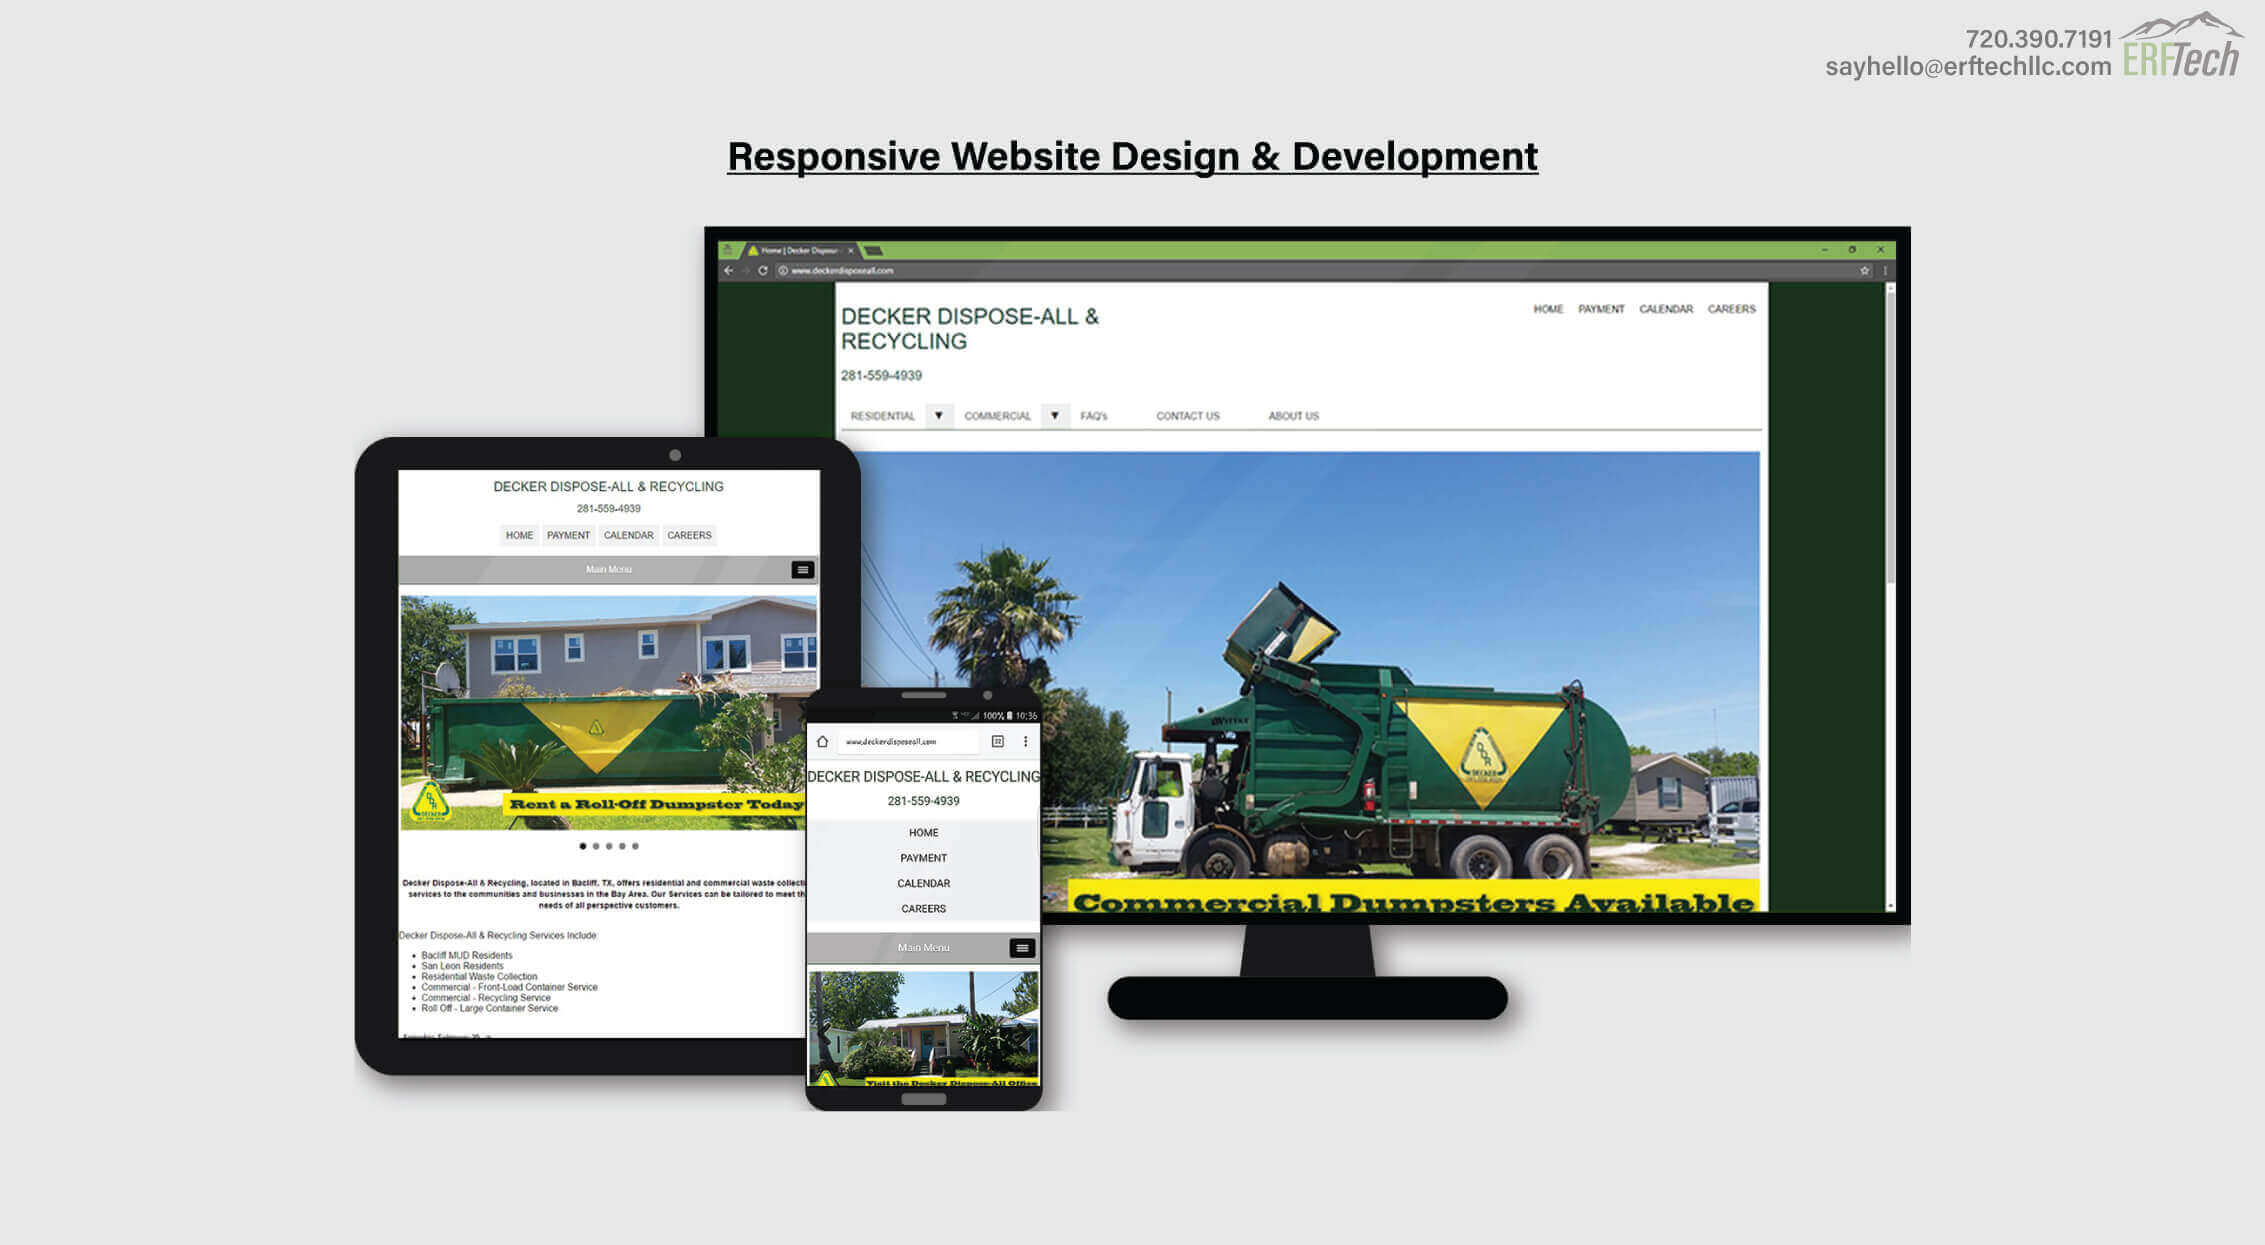 Website Management for Decker Dispose-All & Recycling in Bacliff, TX